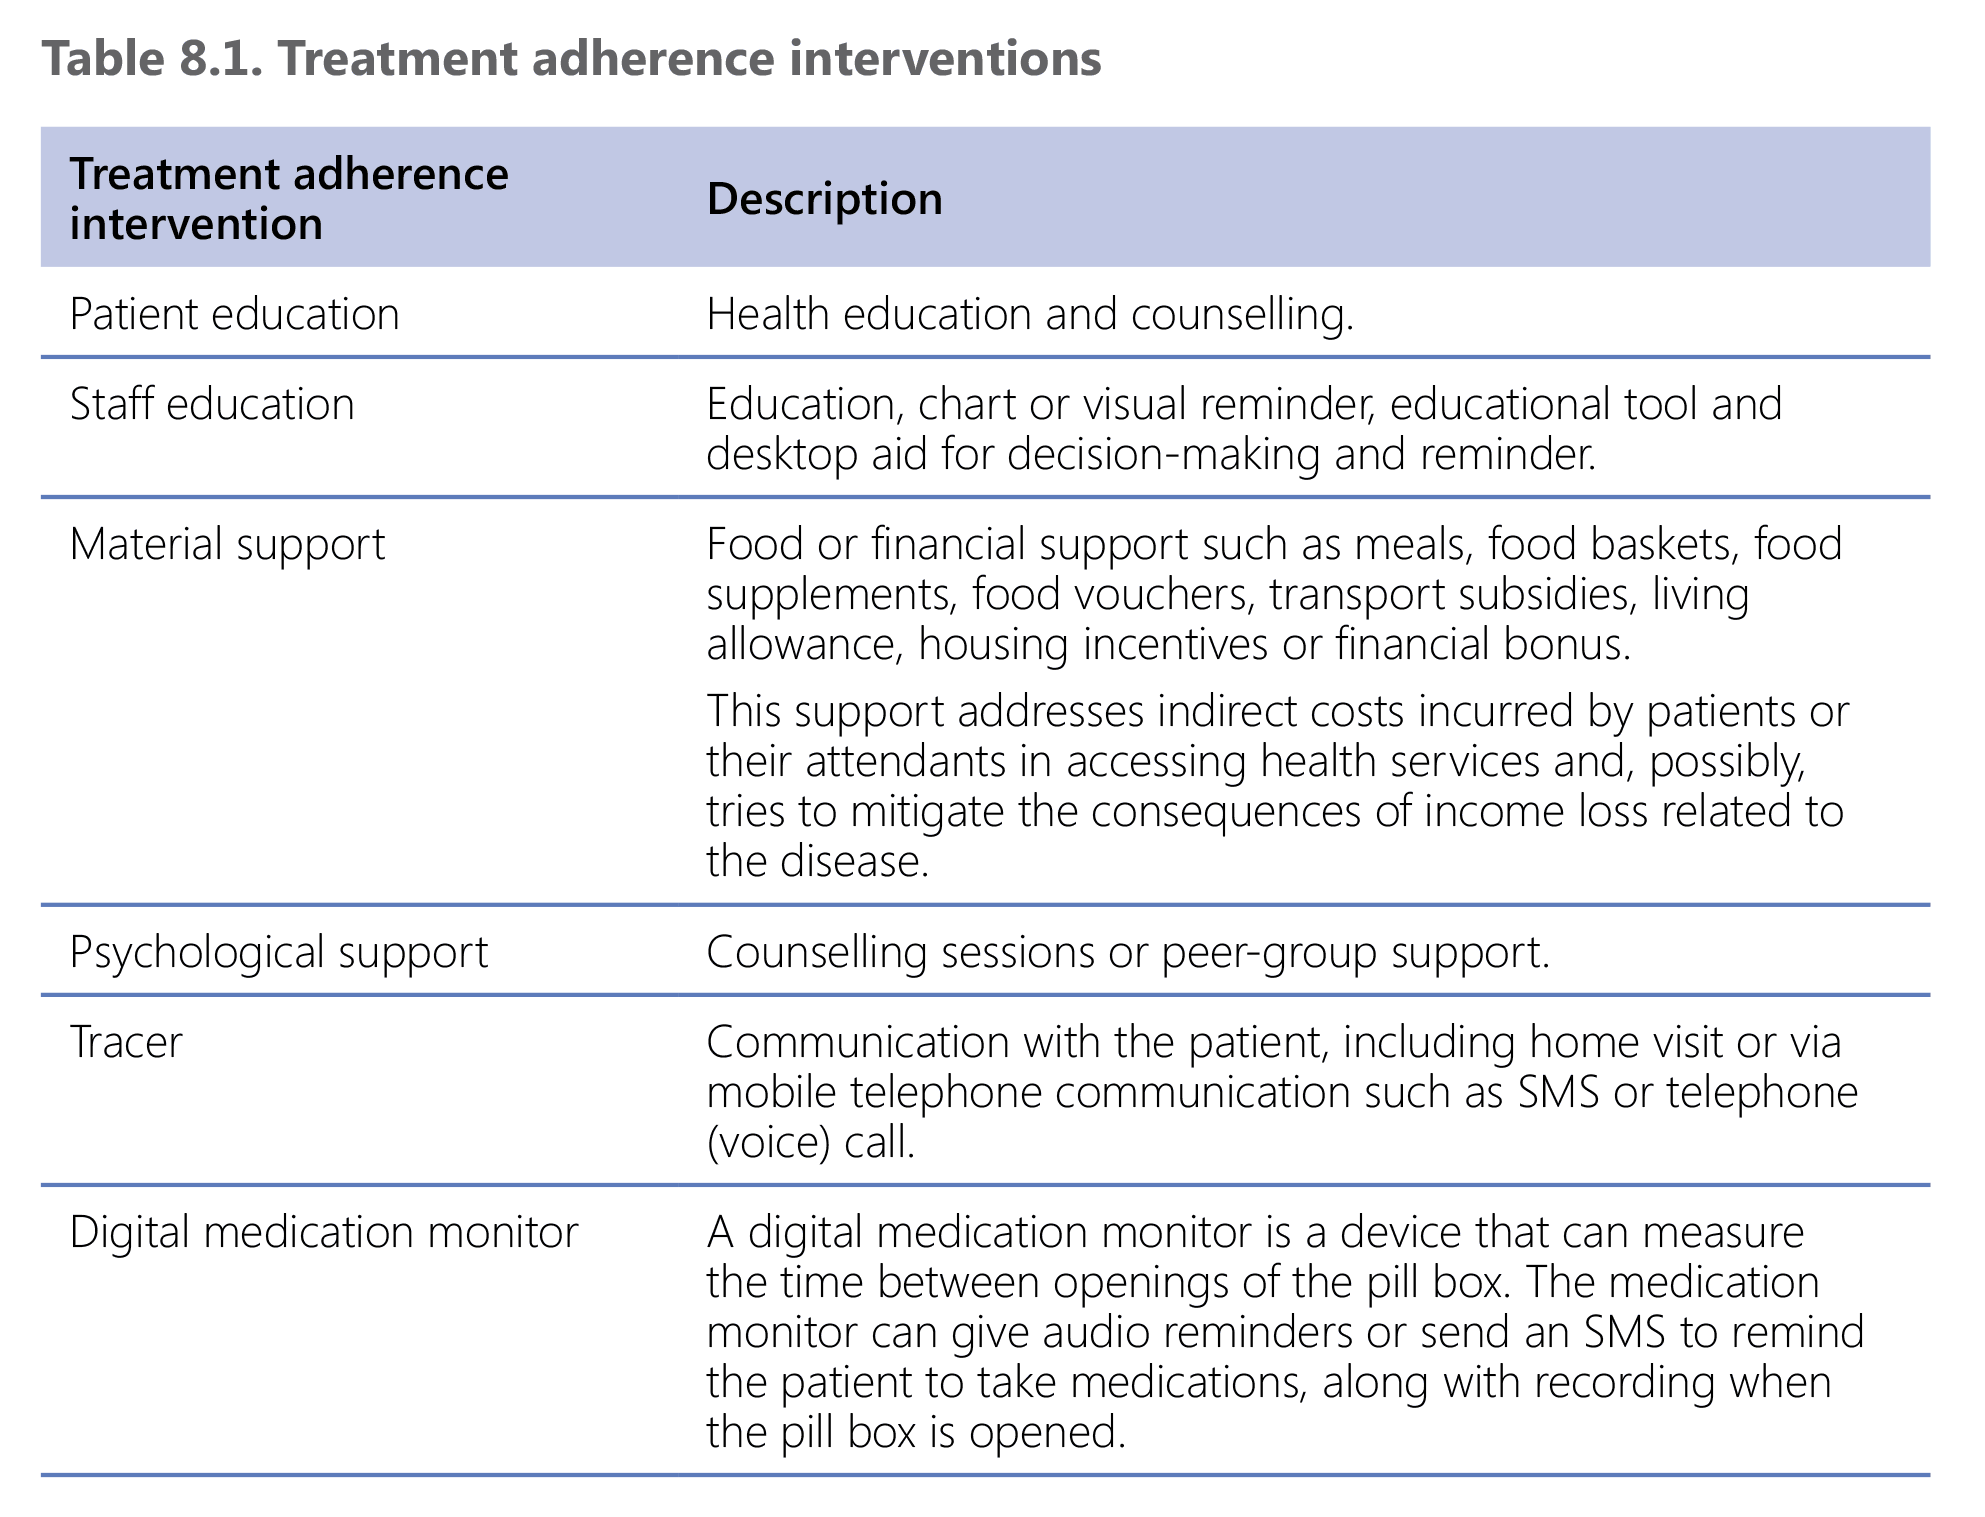  Treatment adherence interventions